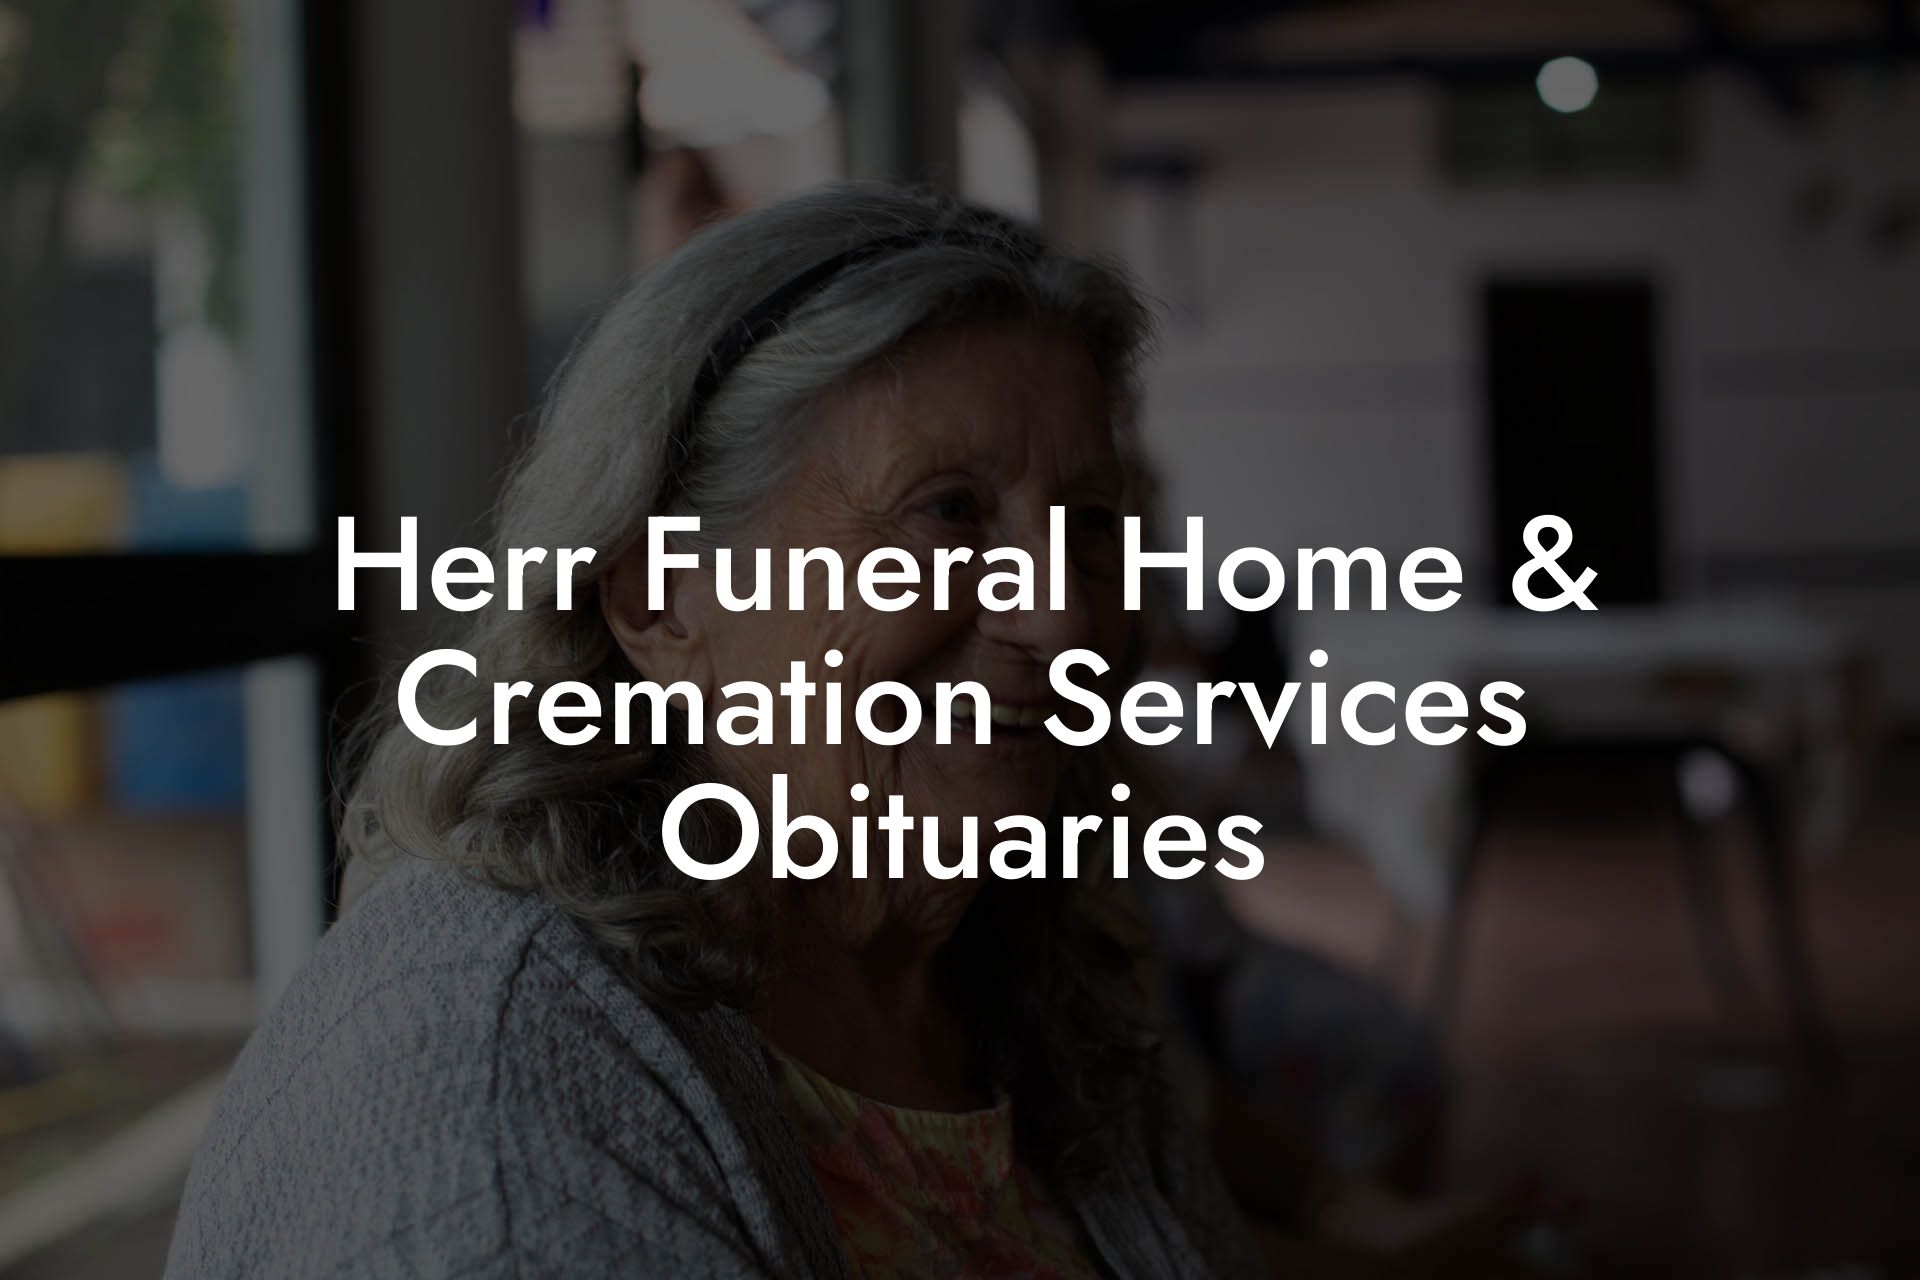 Herr Funeral Home & Cremation Services Obituaries